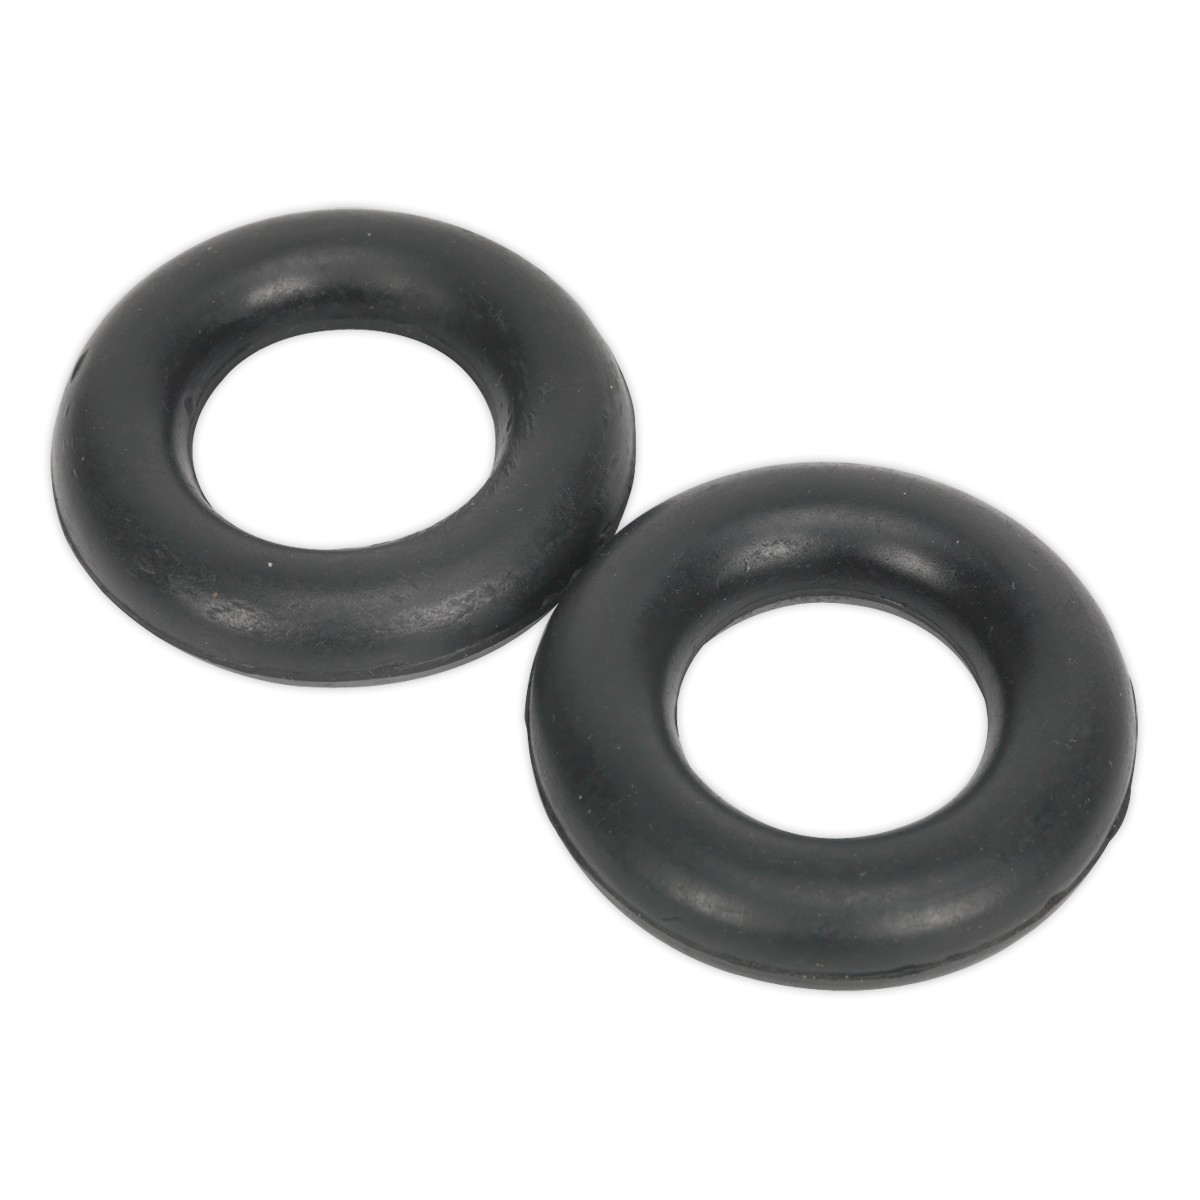 Exhaust Mounting Rubbers - L59 x W59 x D13.5 (Pack of 2) - EX04 - Farming Parts